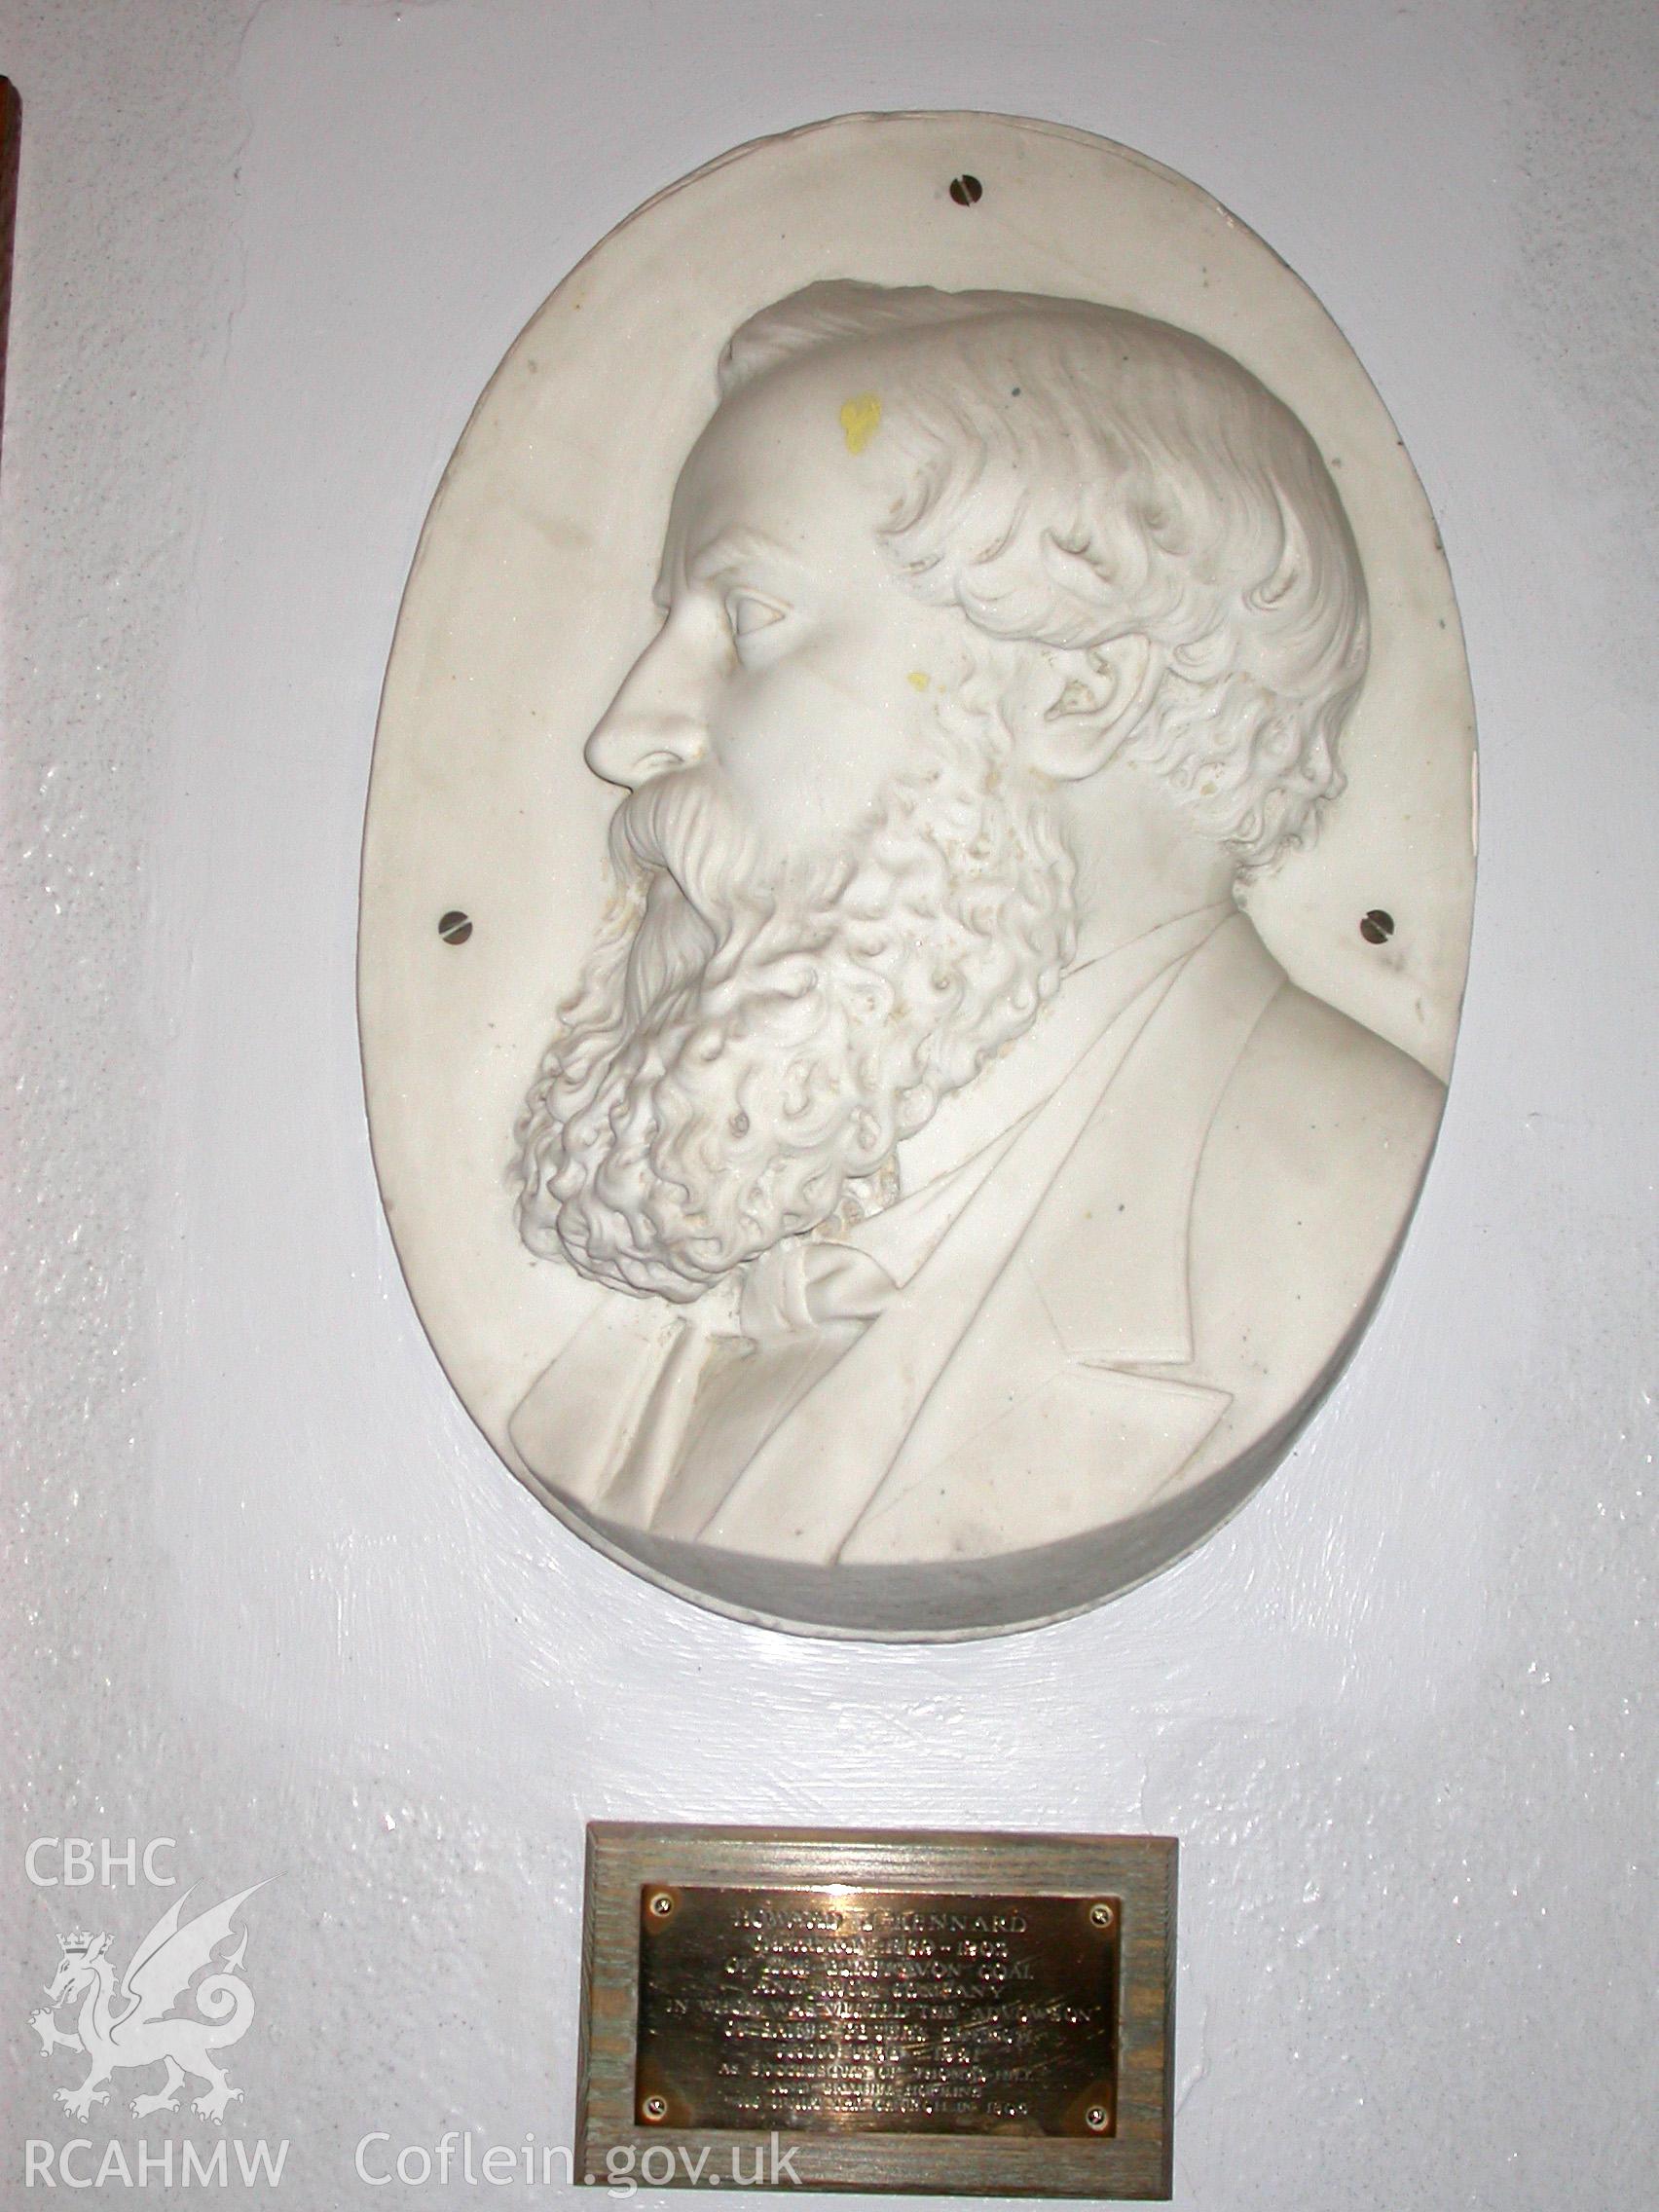 Brass plaque under the wall-mounted profile bust of Howard Kennard.